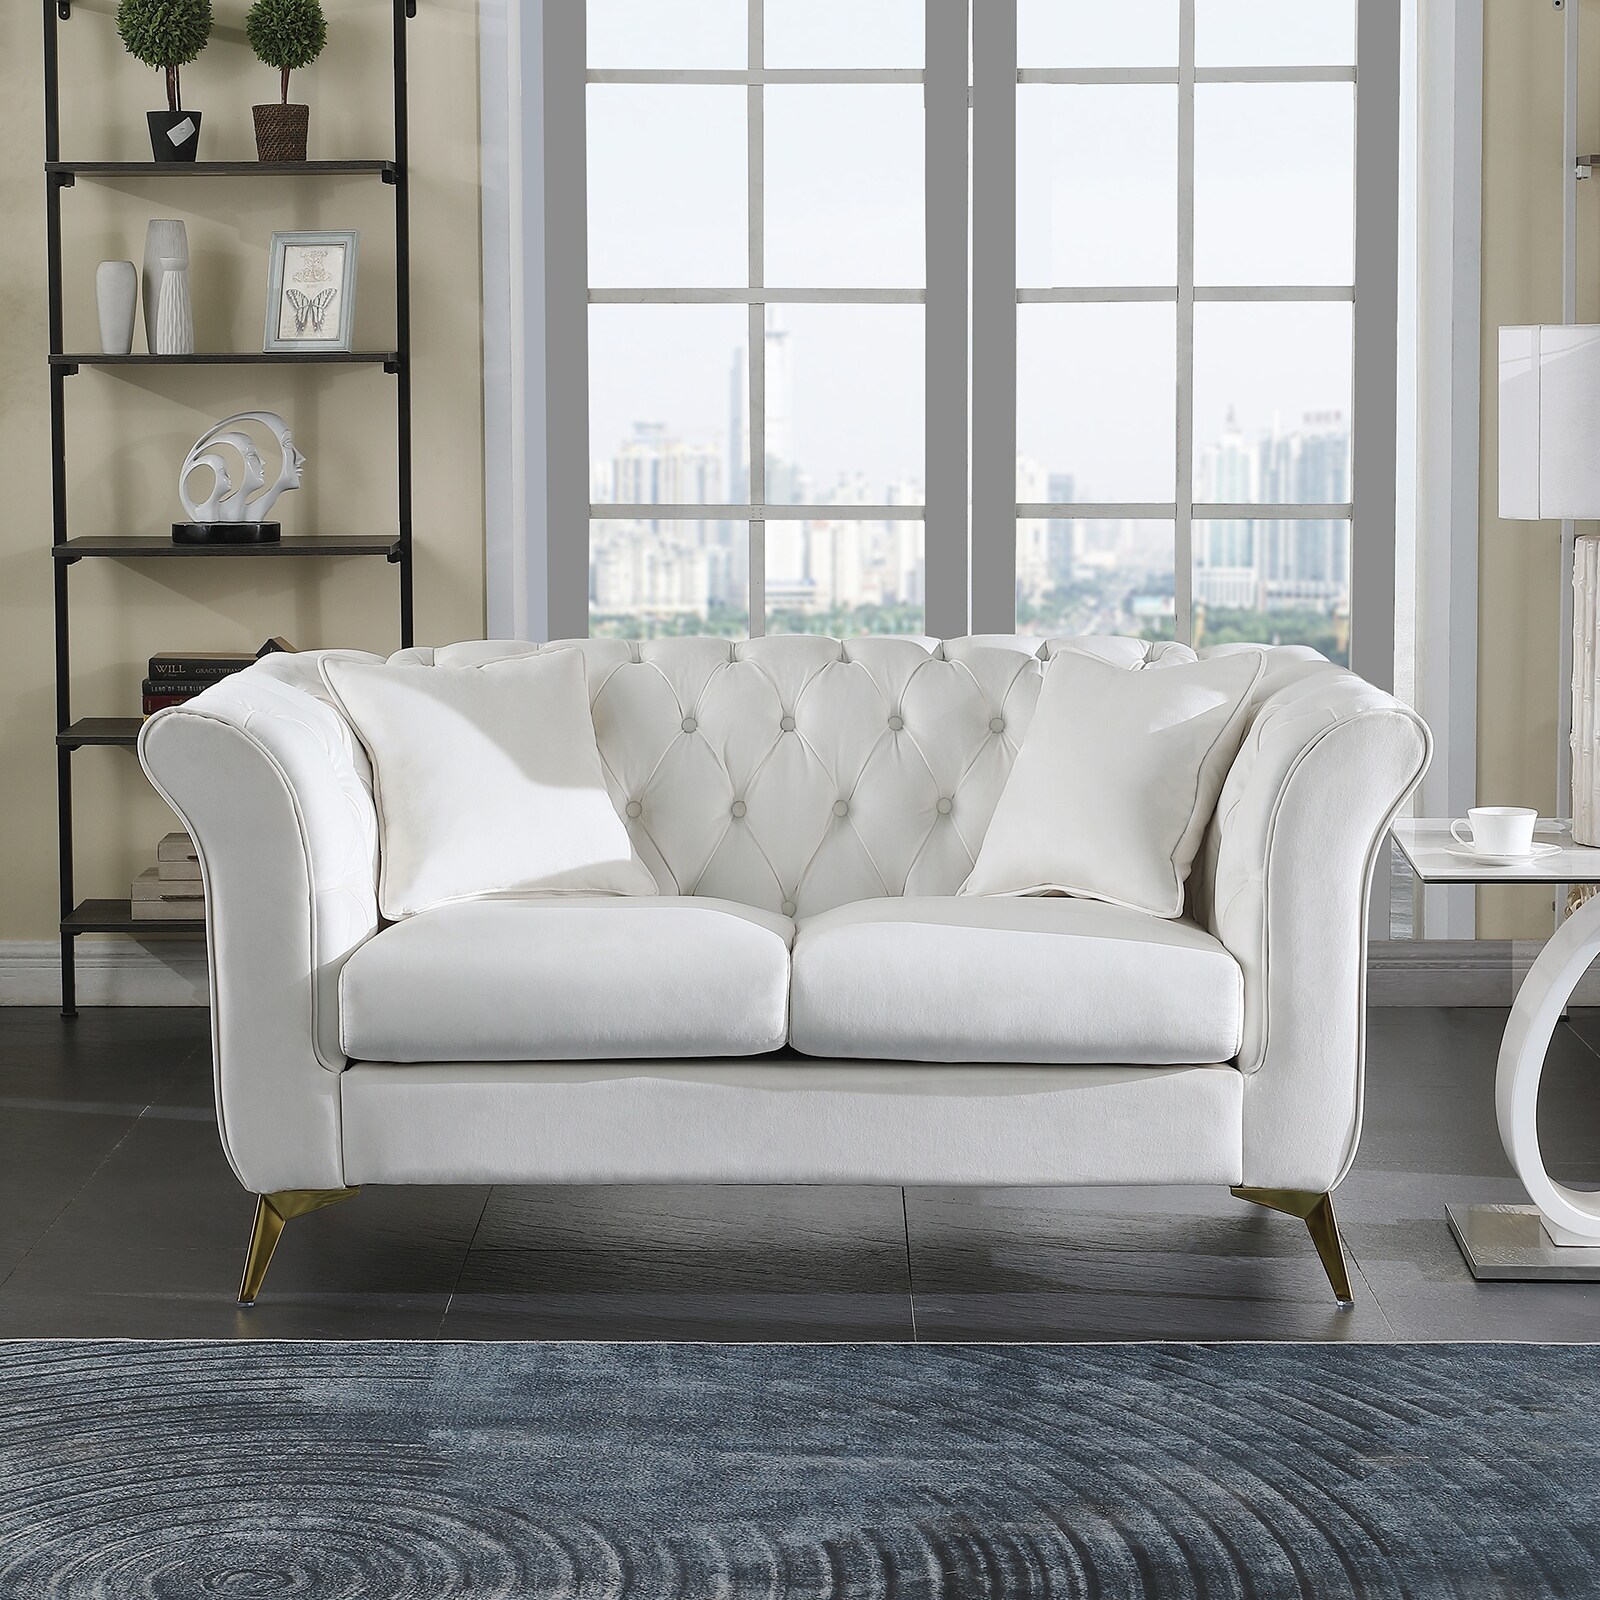 https://ak1.ostkcdn.com/images/products/is/images/direct/9a420102e28e63b2d0534054163af339ff0df6df/Velvet-Upholstered-Loveseat-Sofa-Modern-Tufted-Back-Couch-Removable-Cushions-Sofa-for-Living-Room-with-2-Throw-Pillow.jpg